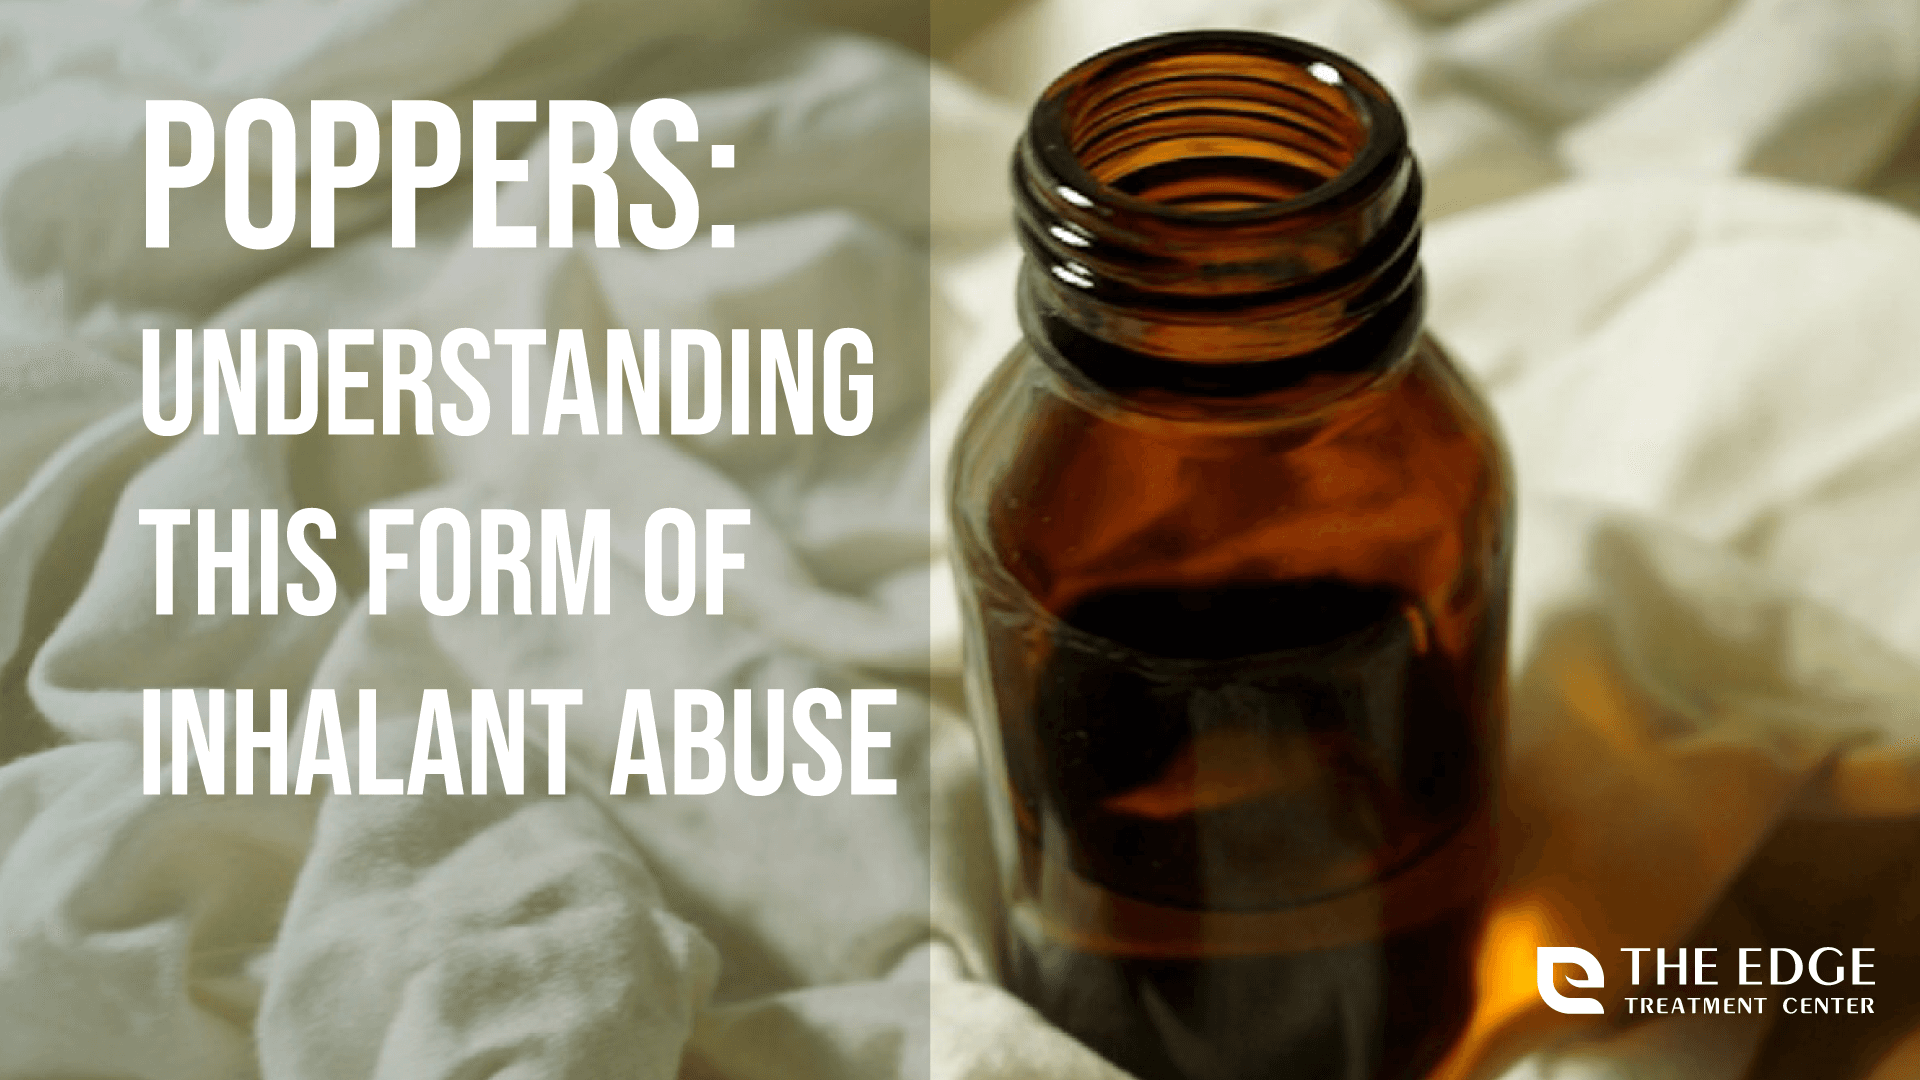 What Are Poppers?